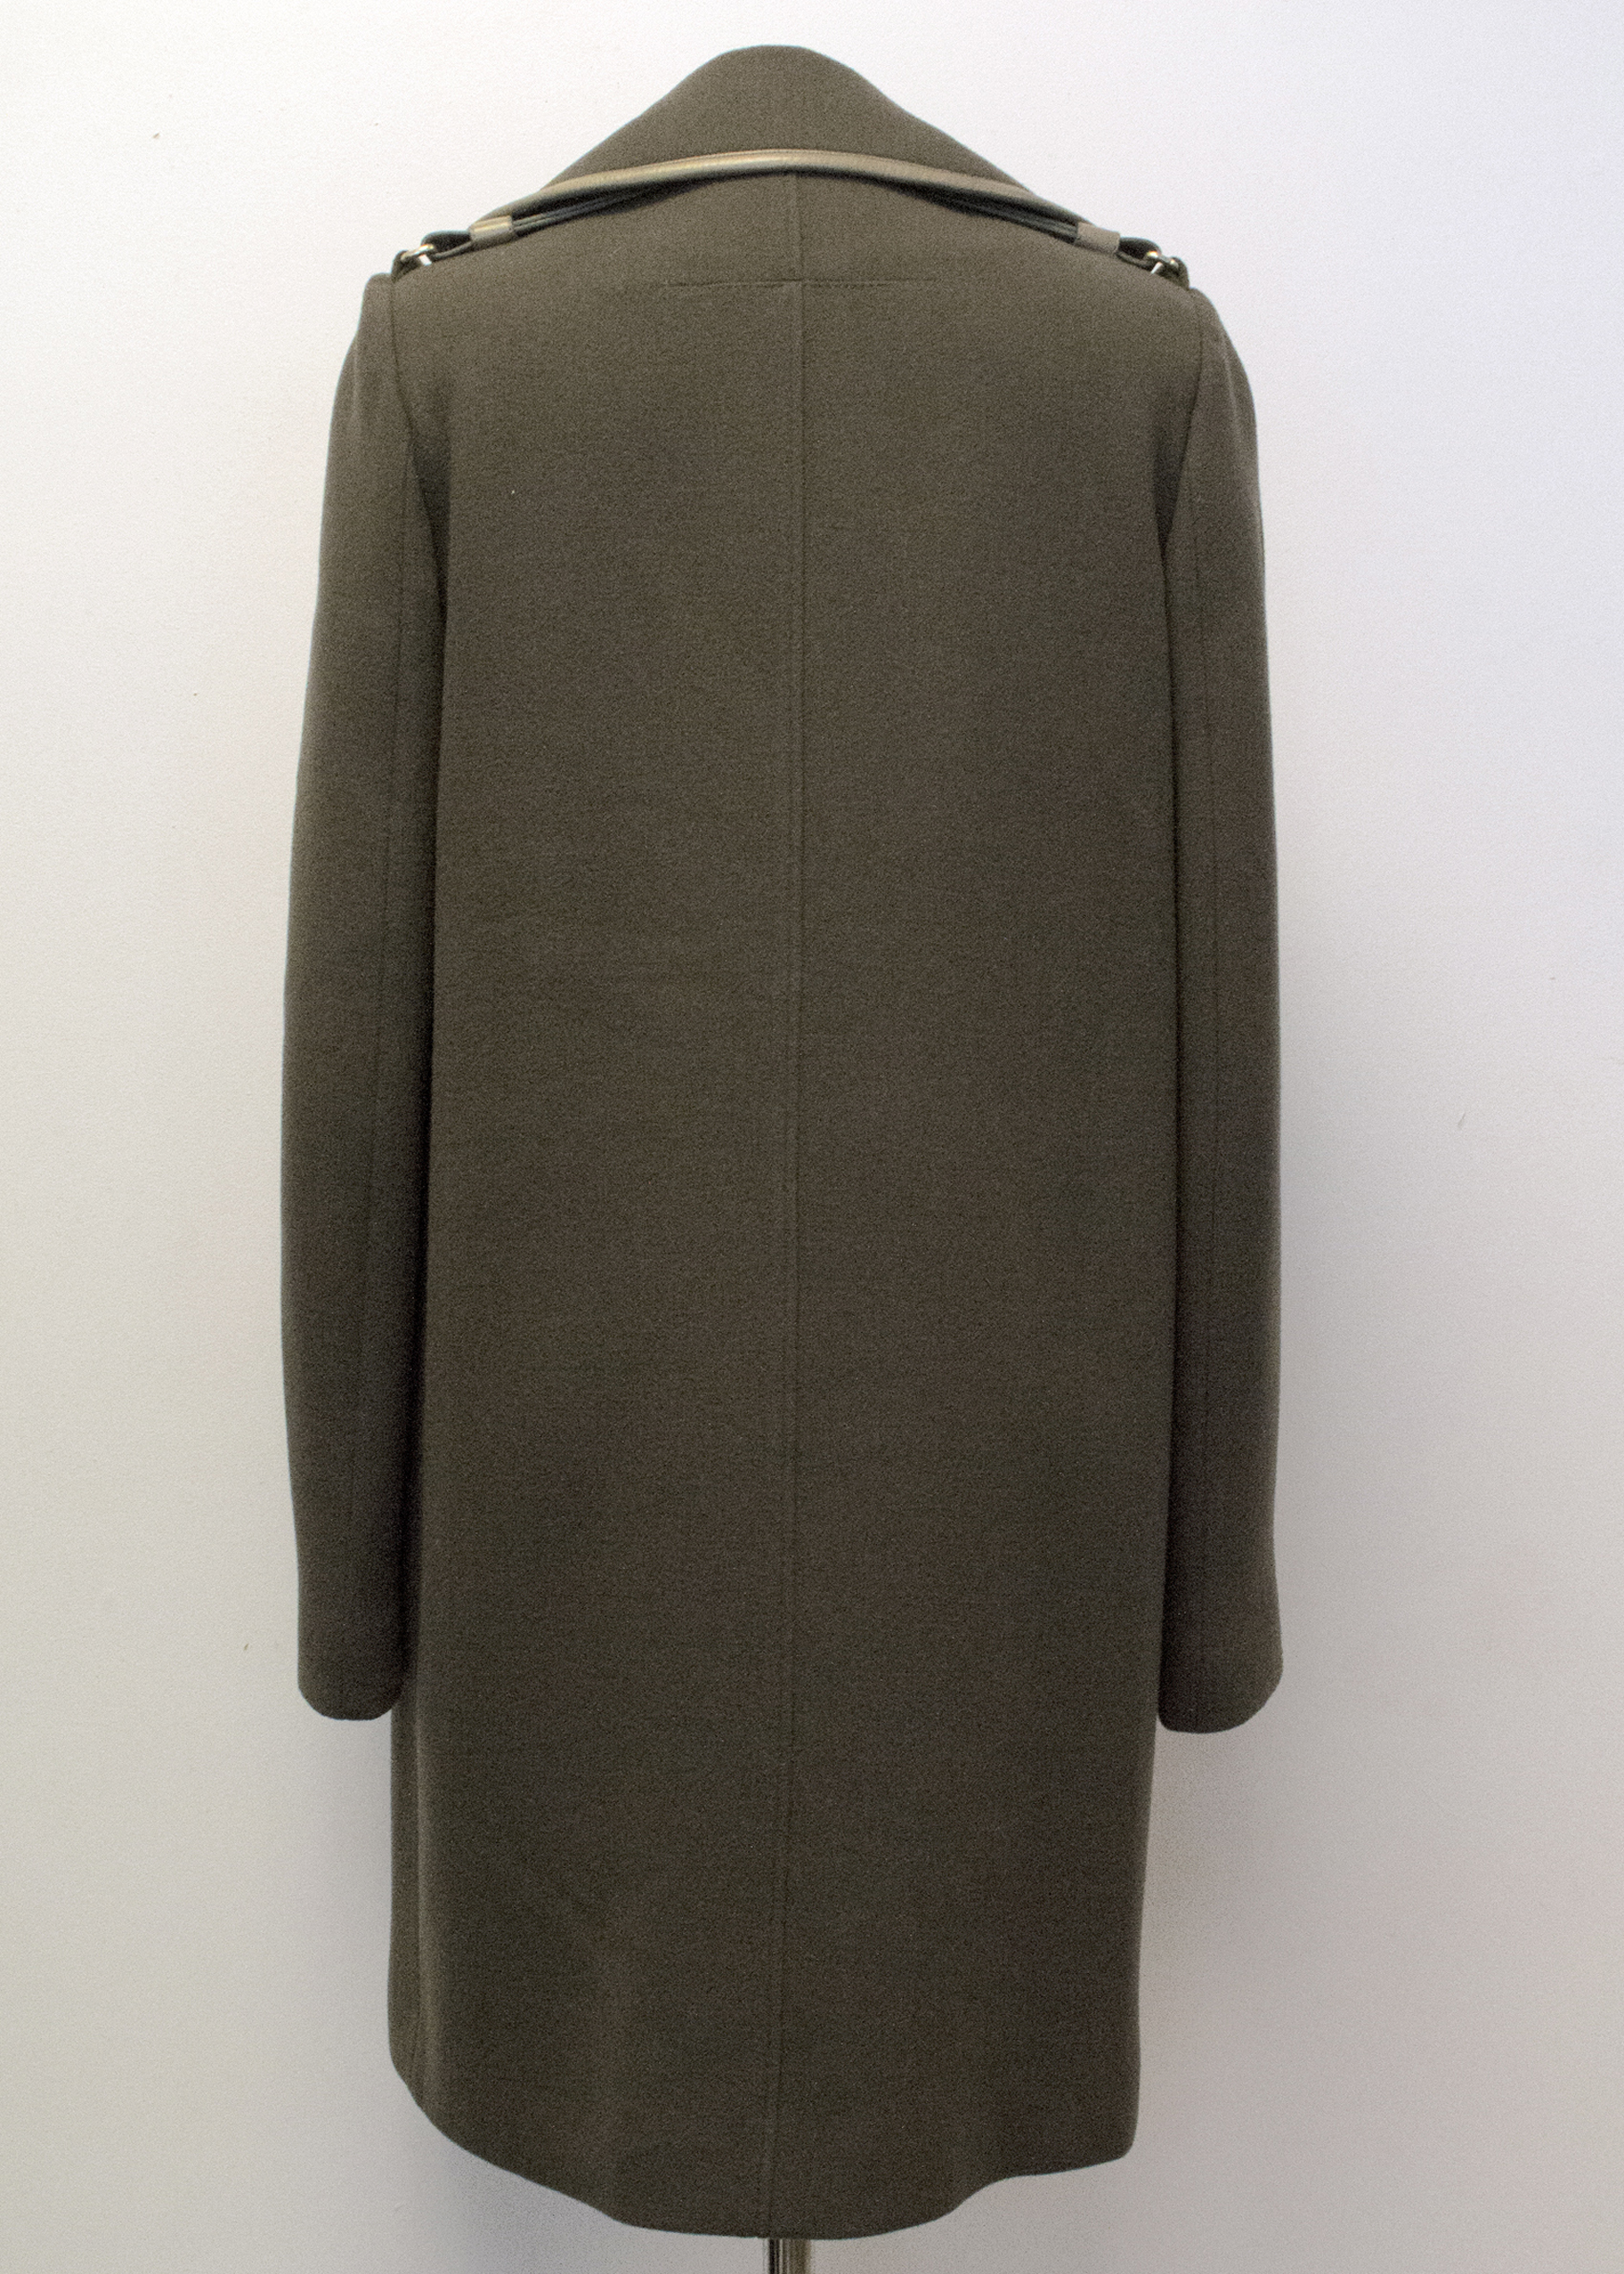 Givenchy Army Green Coat | HEWI